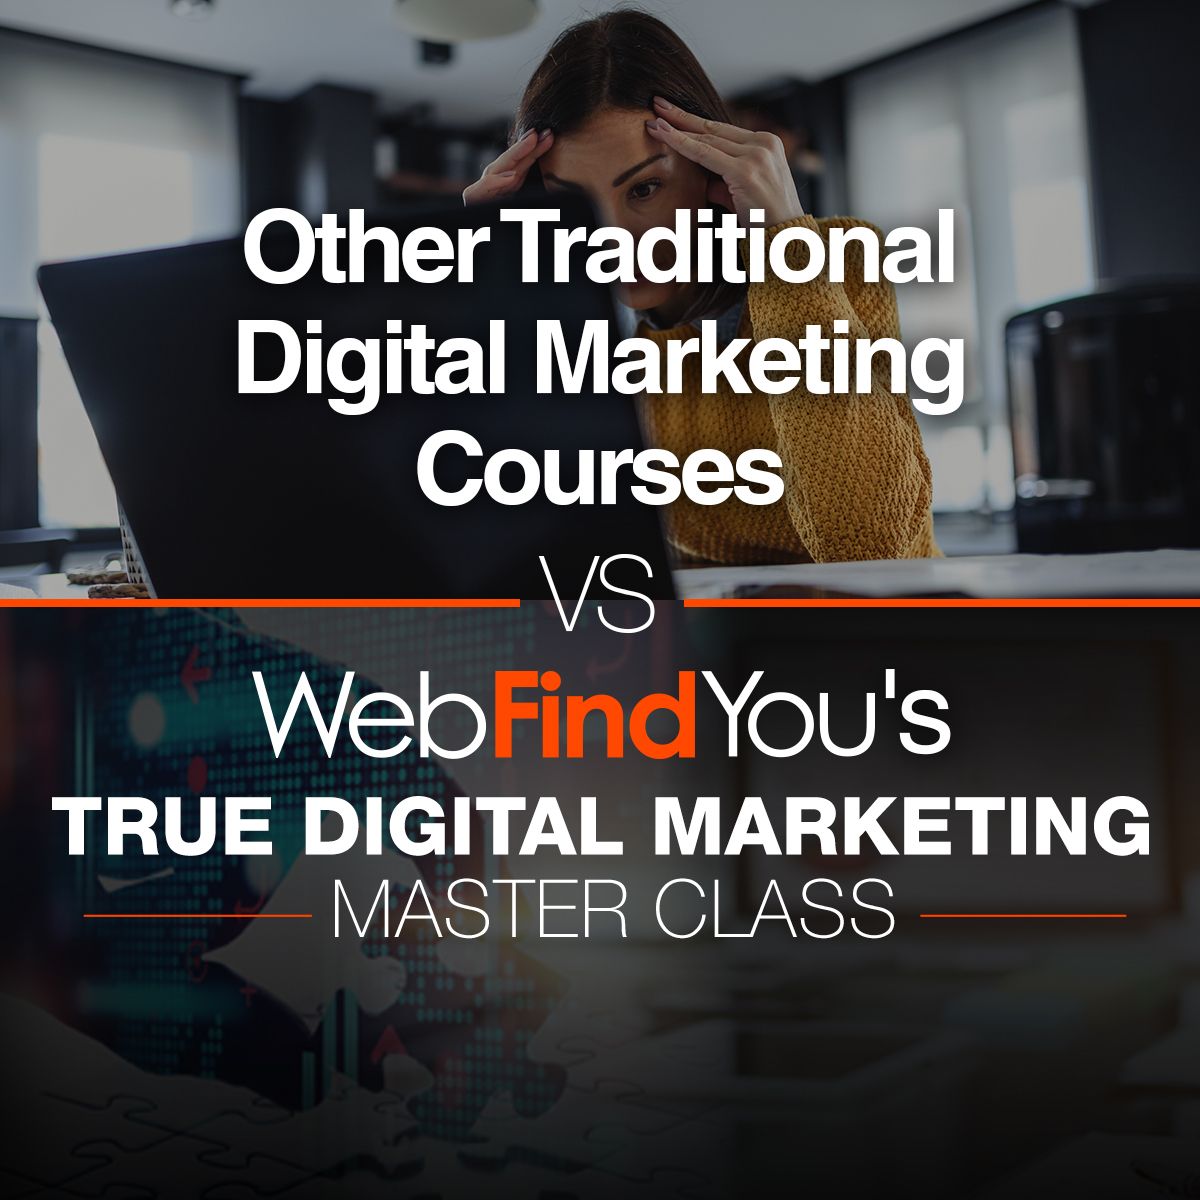 Other Traditional Digital Marketing Courses vs. WebFindYou's True Ditigal Marketing Master Class